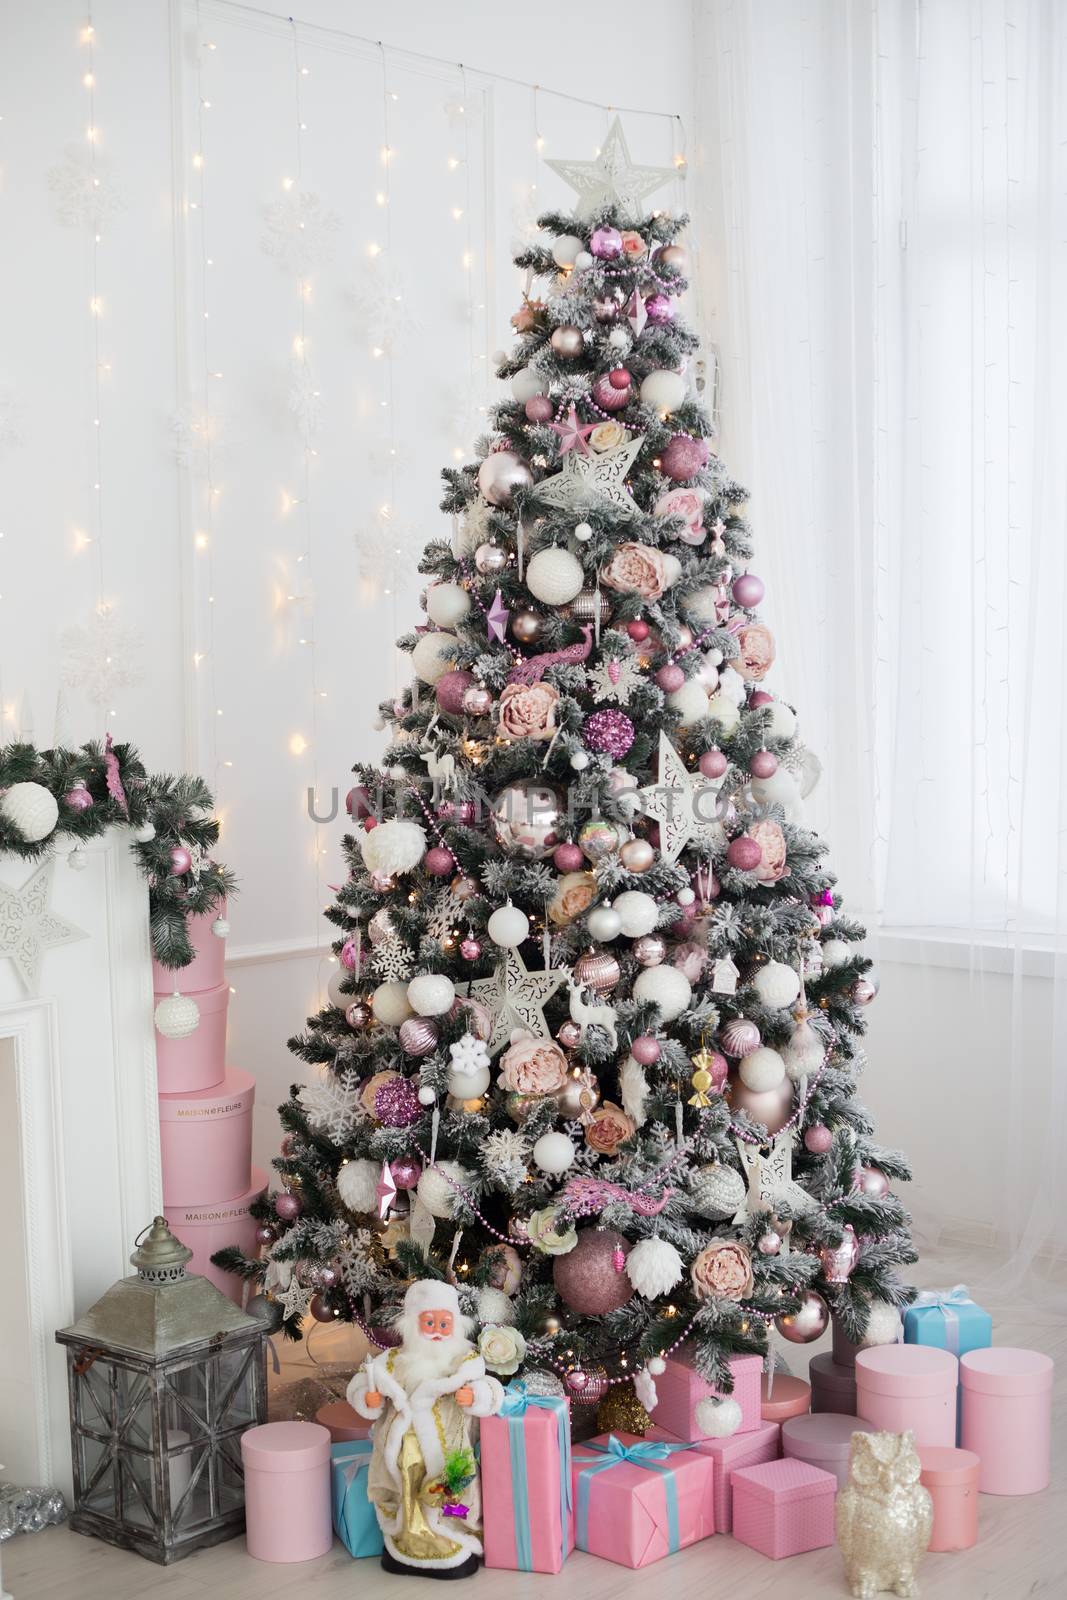 Green and White Christmas tree with pink toys new year winter gifts decor.